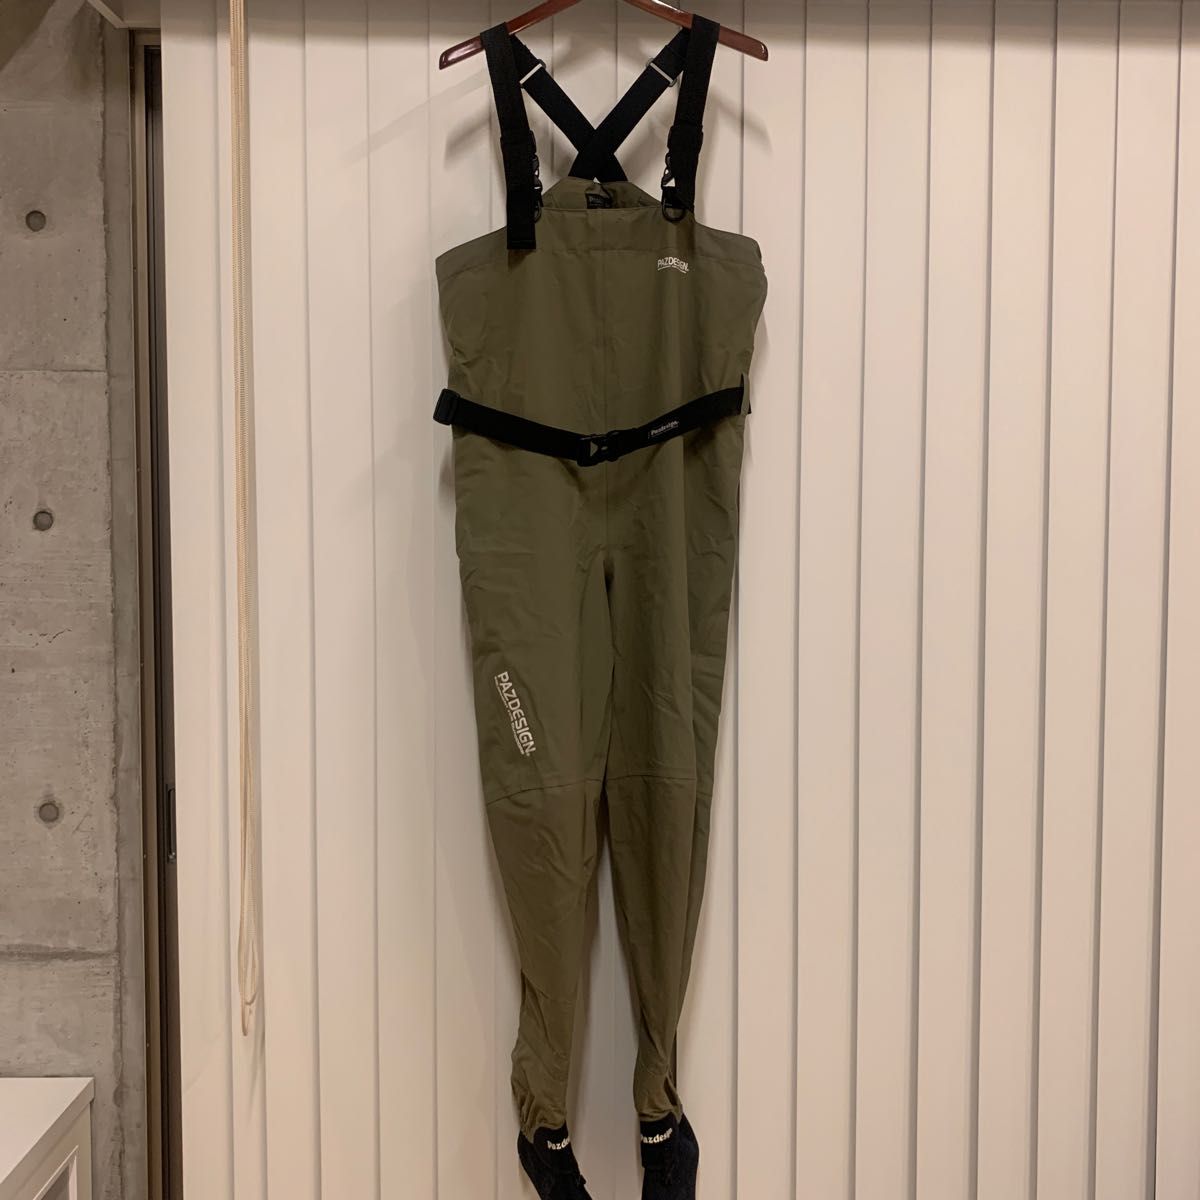 Pazdesign PBW-507 BS CHEST HIGH WADER III L ダークストーン 釣り